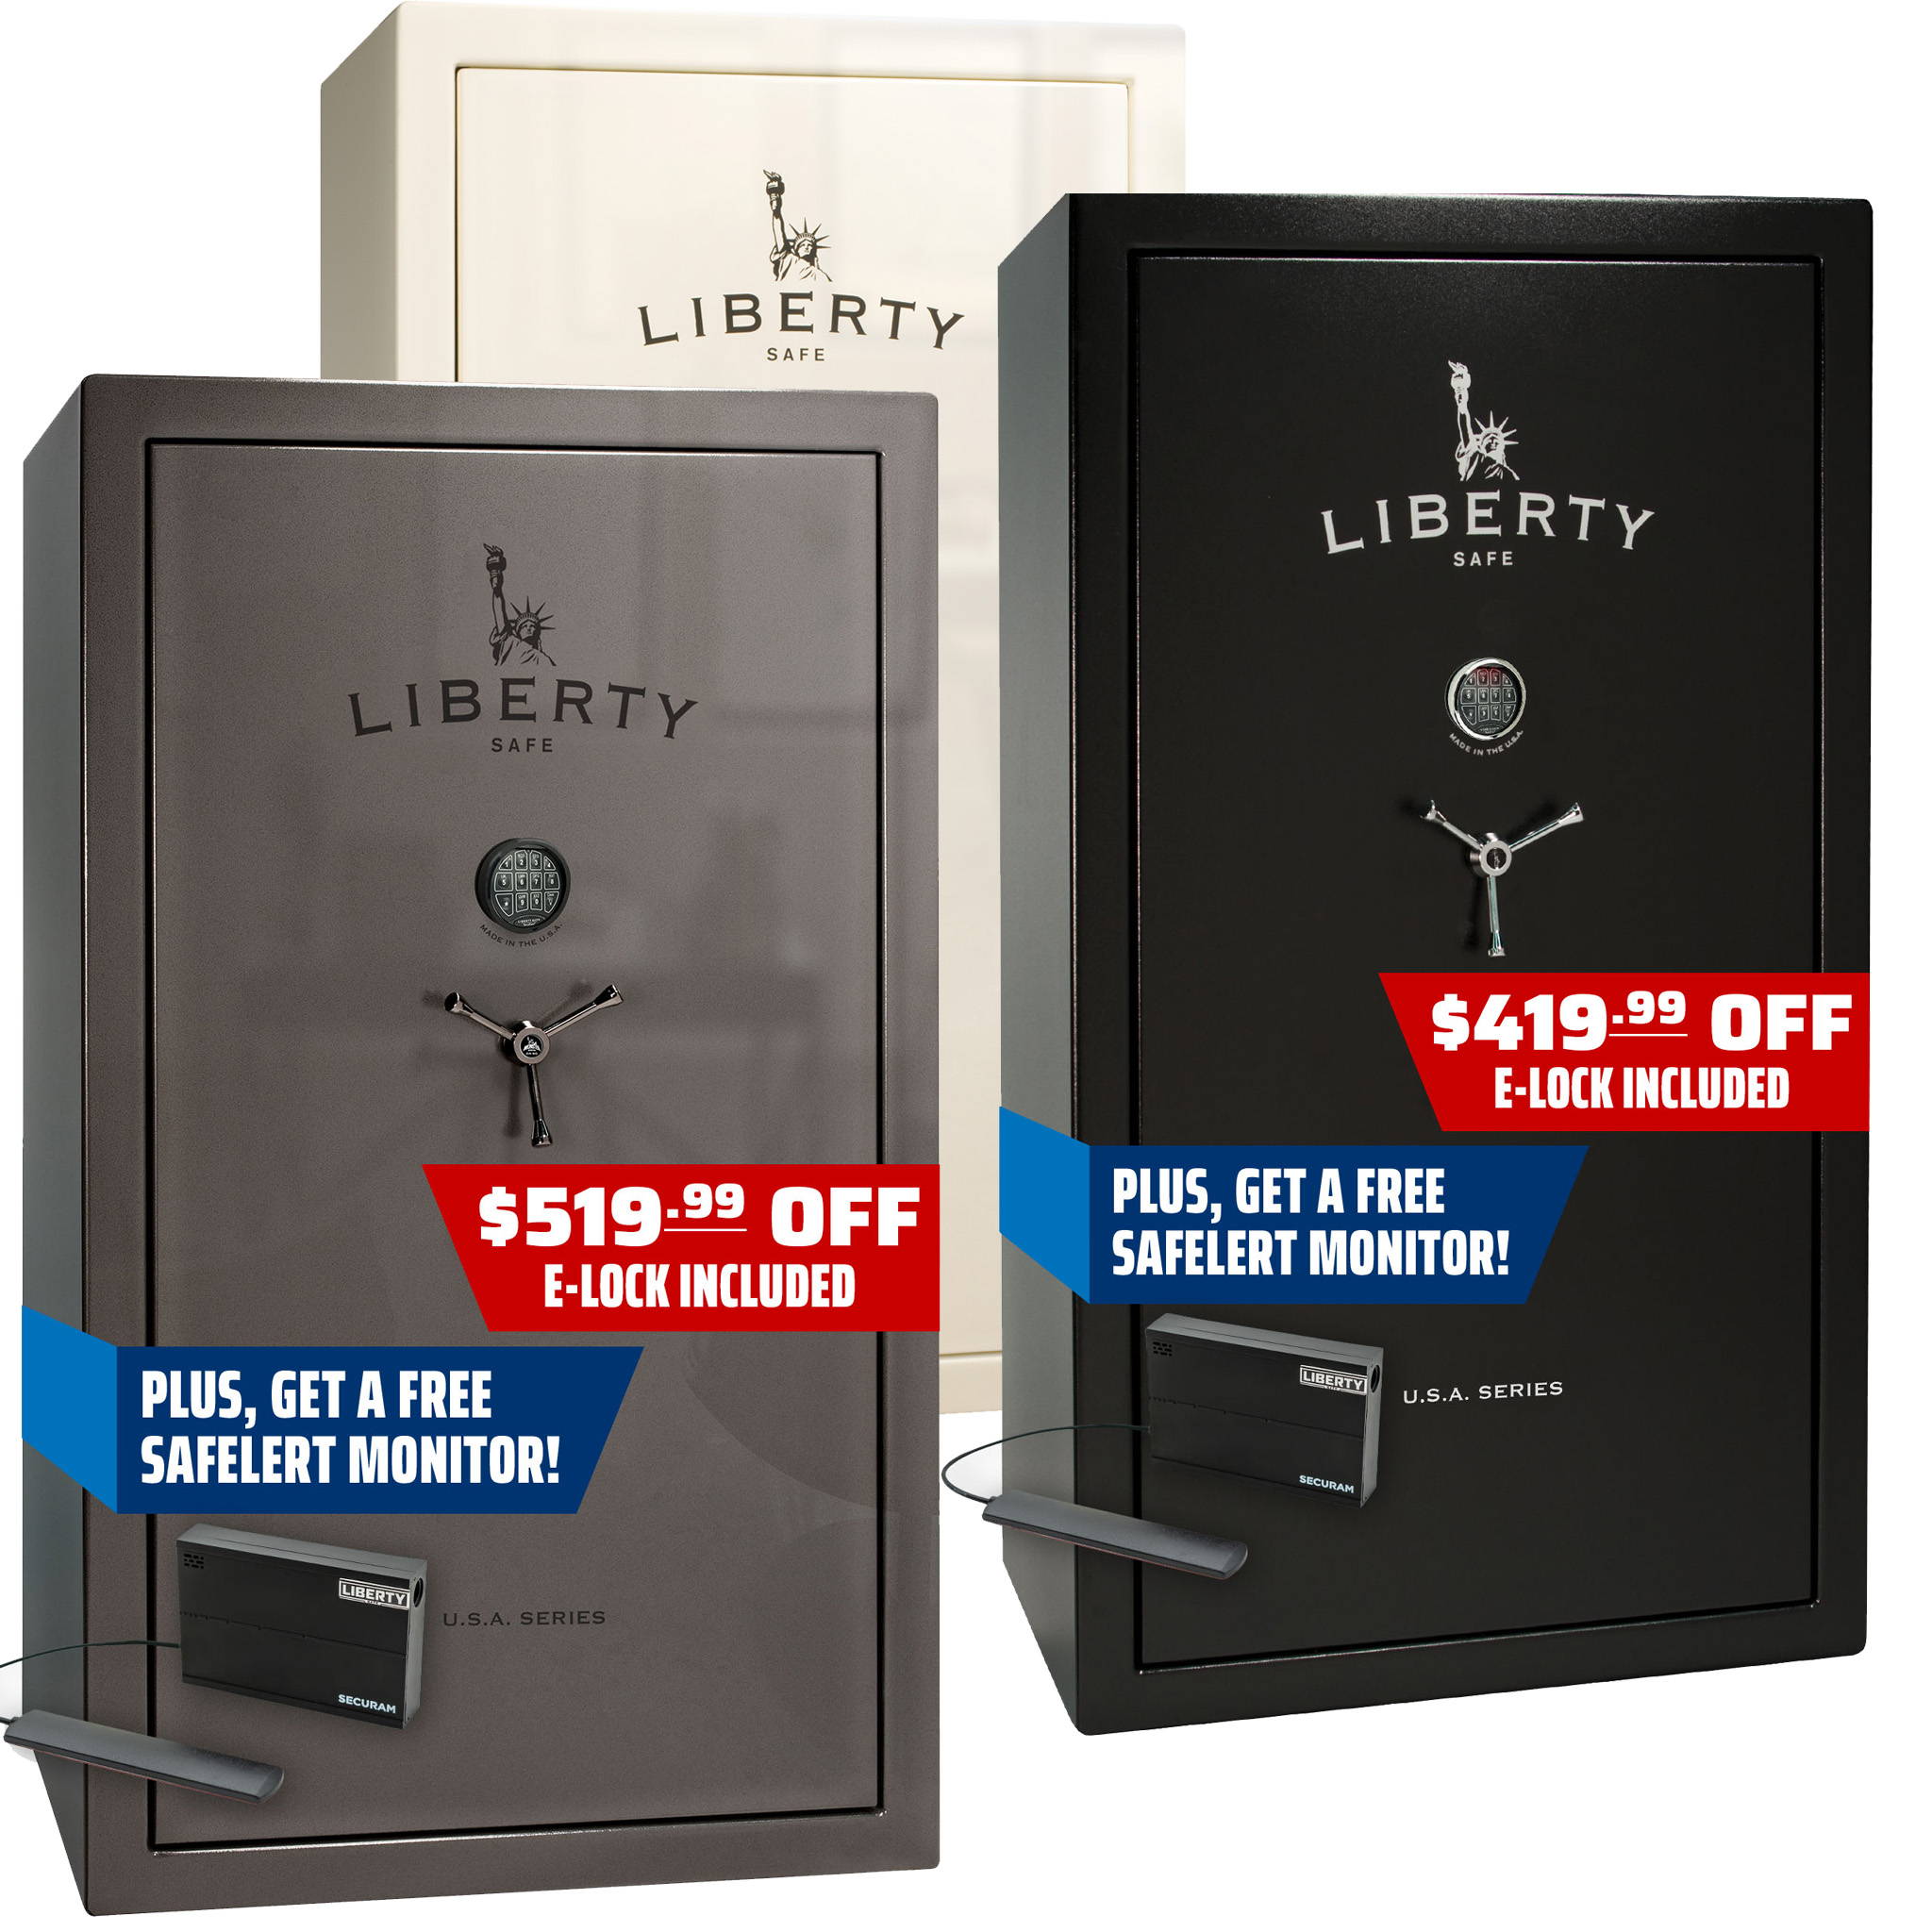 USA 50 Memorial Day Sale with Elock and SafElert Monitor